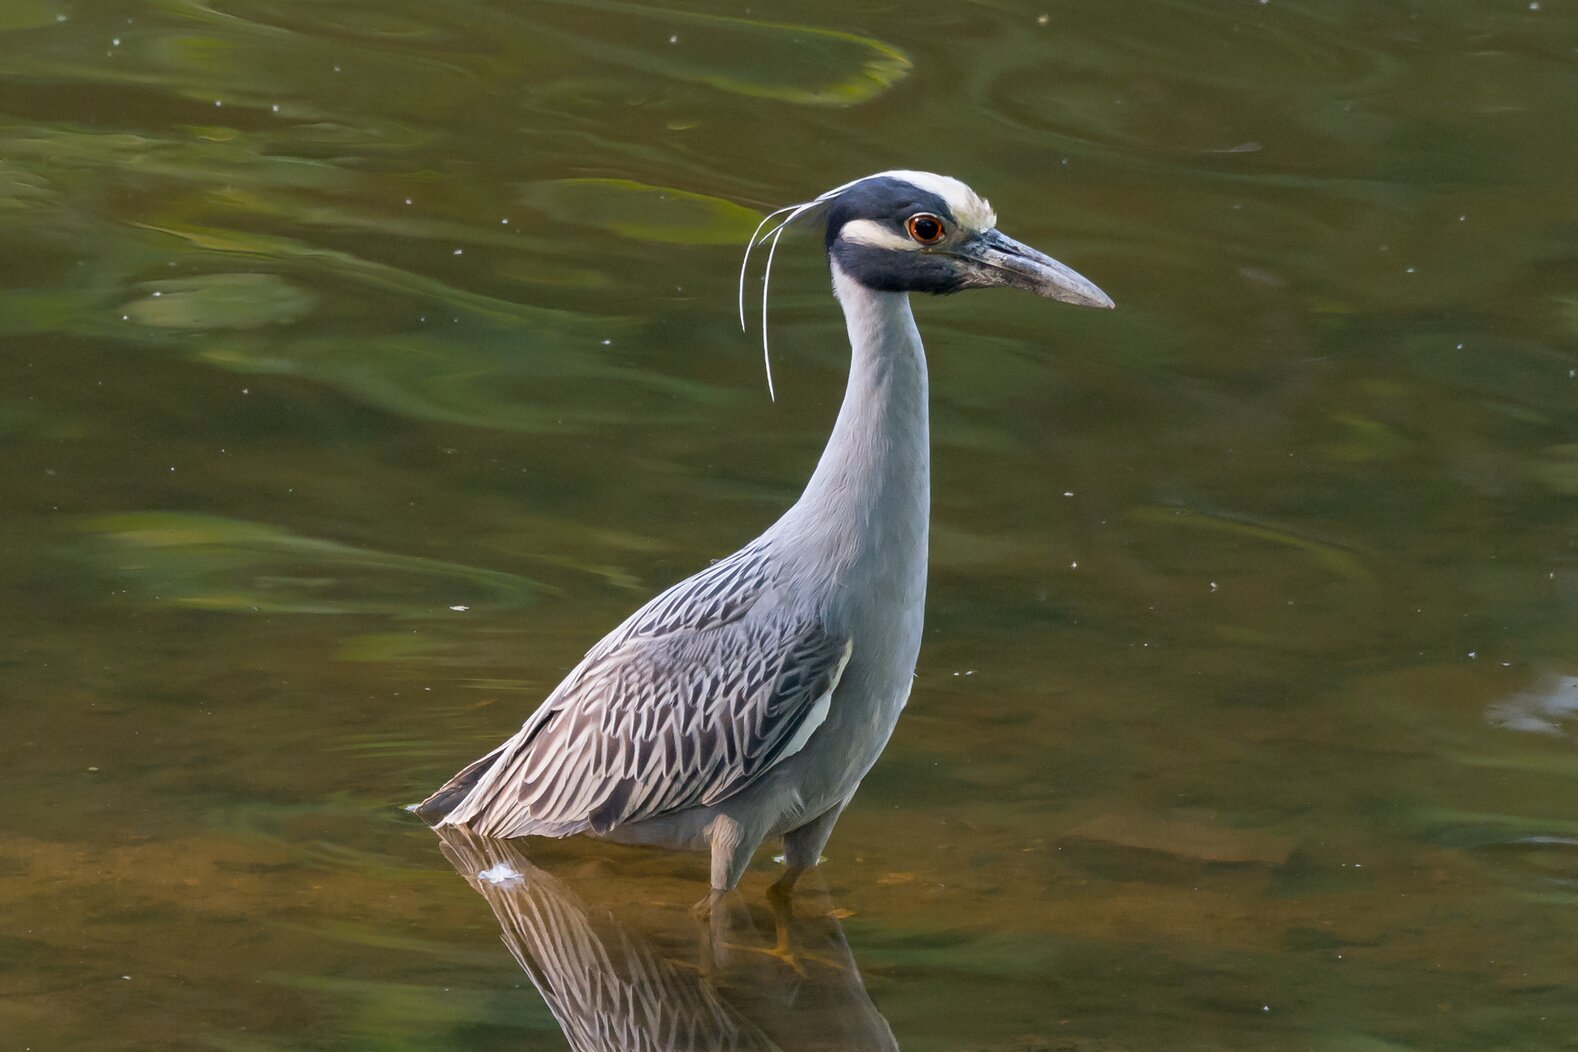 Yellow-crowned Night-Herons come to hunt for crabs and other crustaceans in Pugsley Creek. Photo: Bill VanderMolen/CC BY-NC 2.0